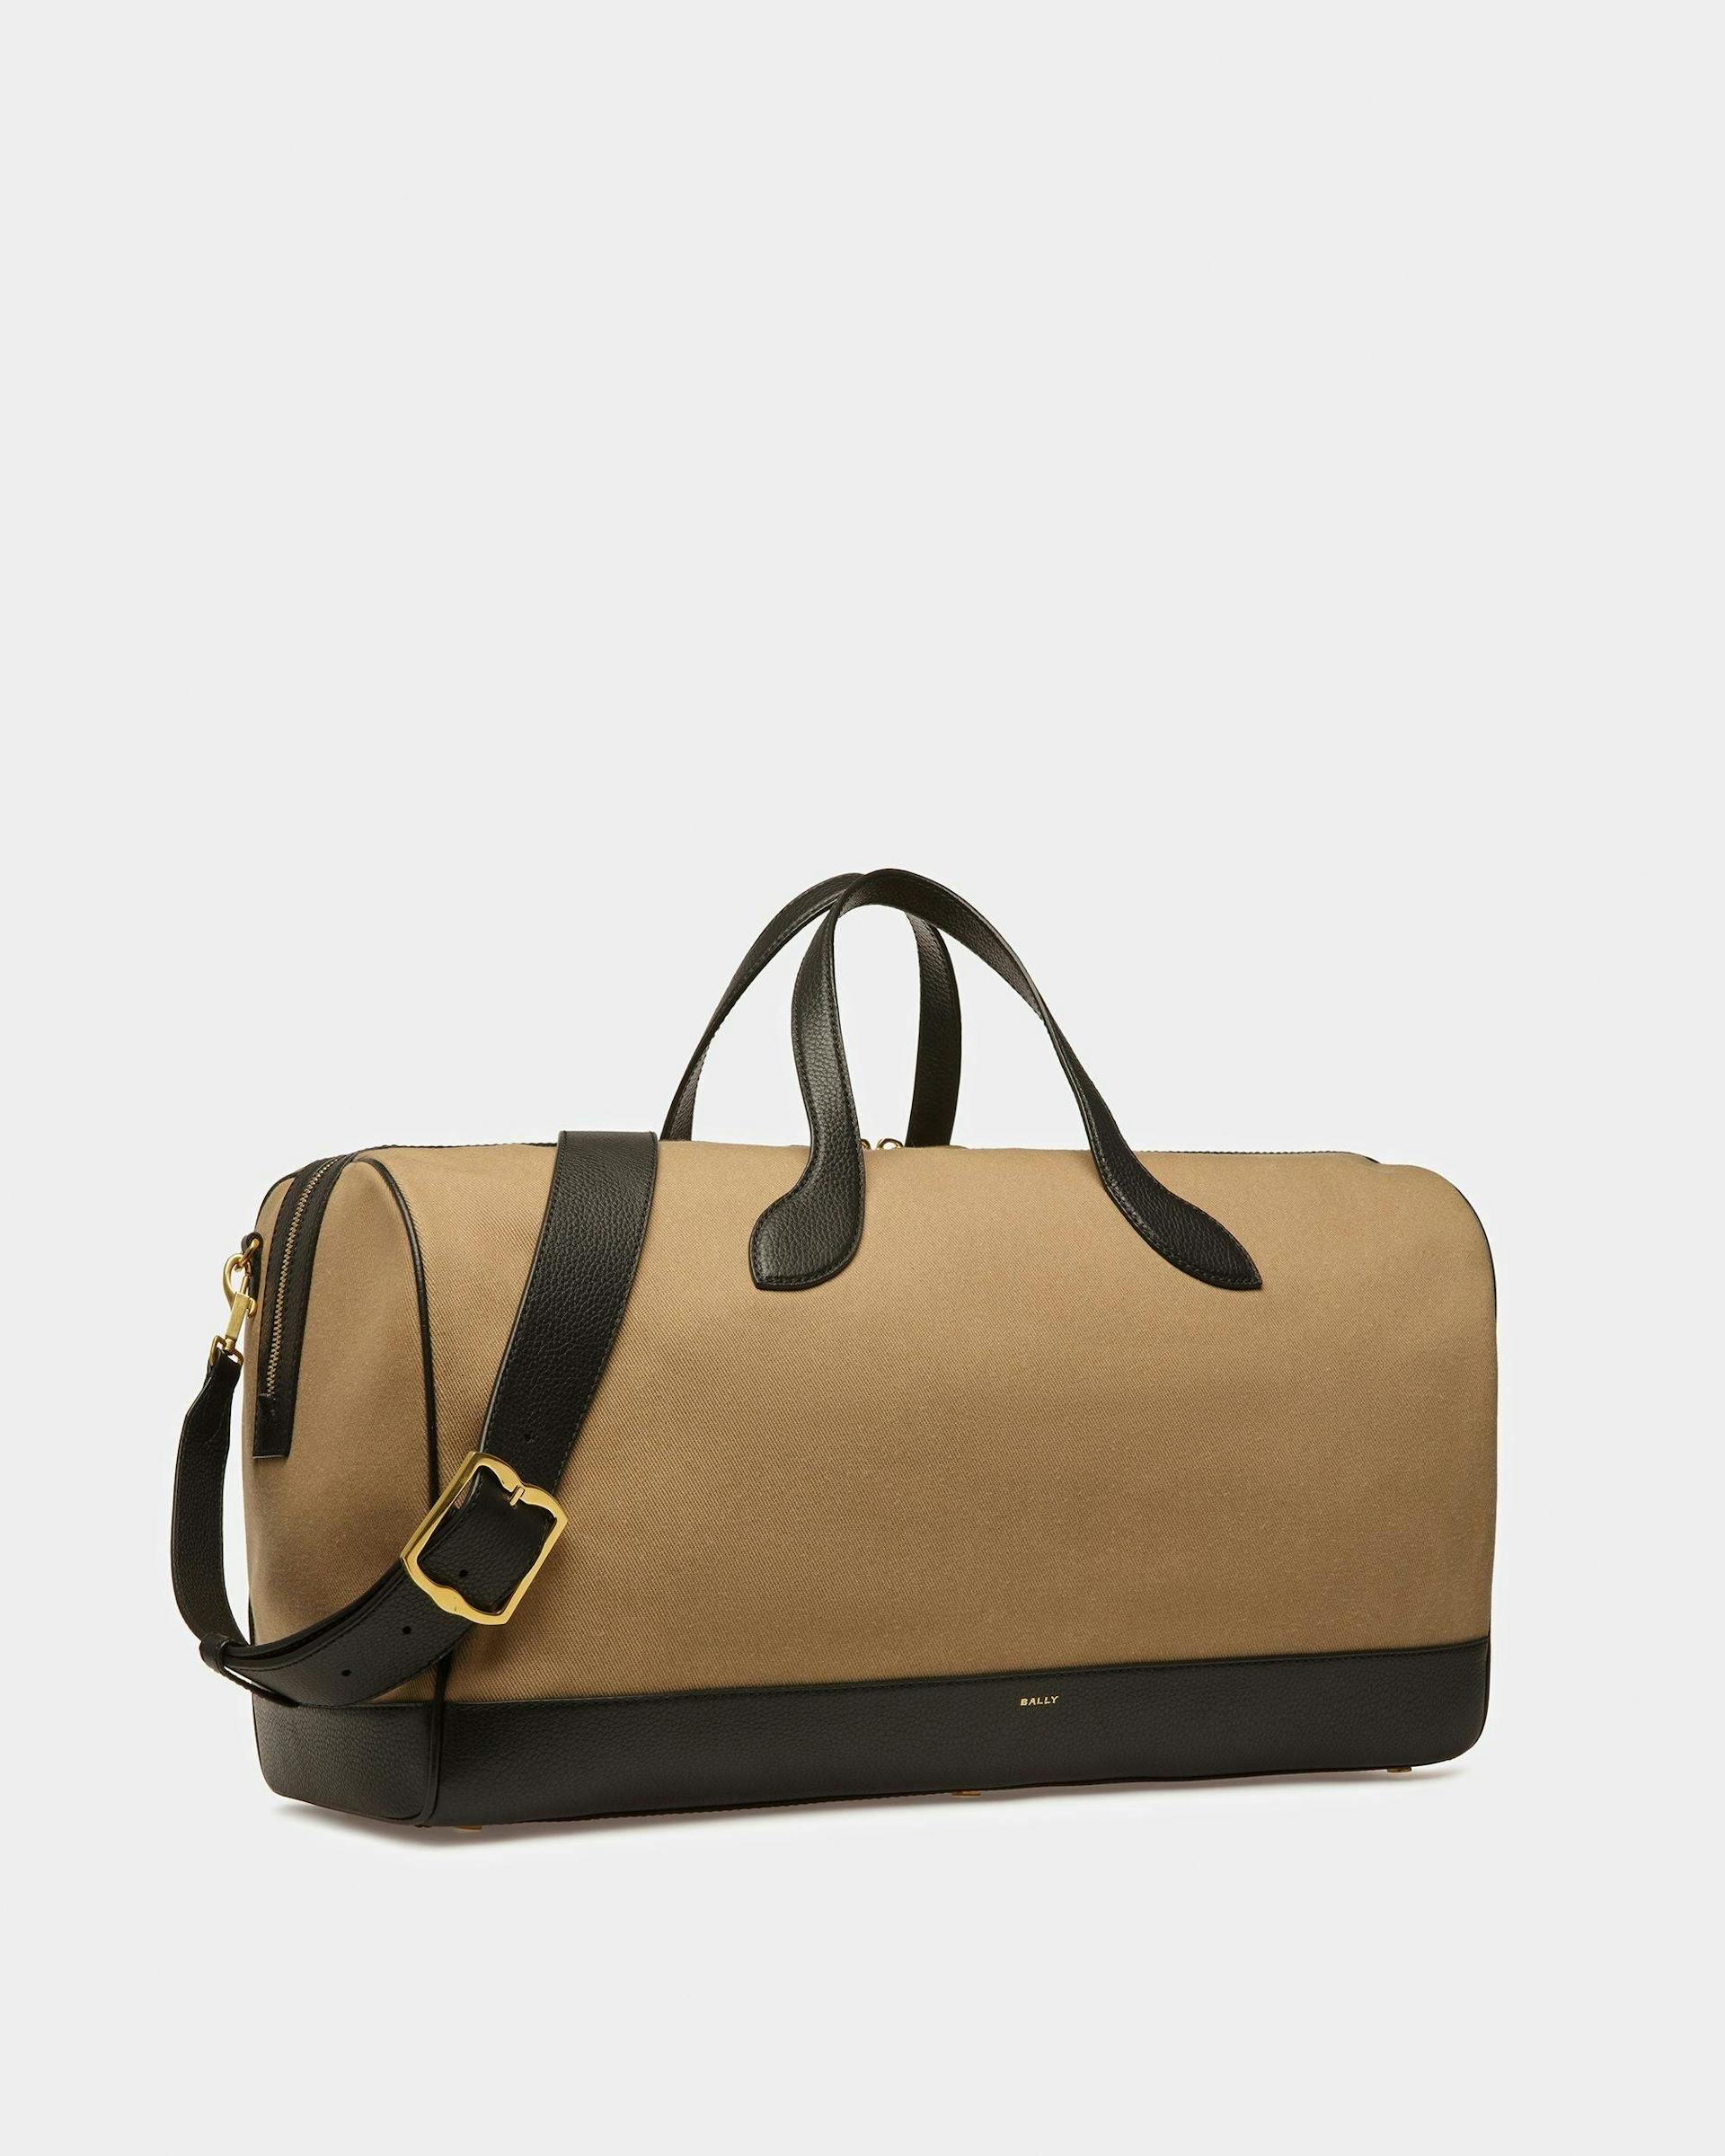 Men's Bar Weekender In Sand And Black Fabric And Leather | Bally | Still Life 3/4 Front